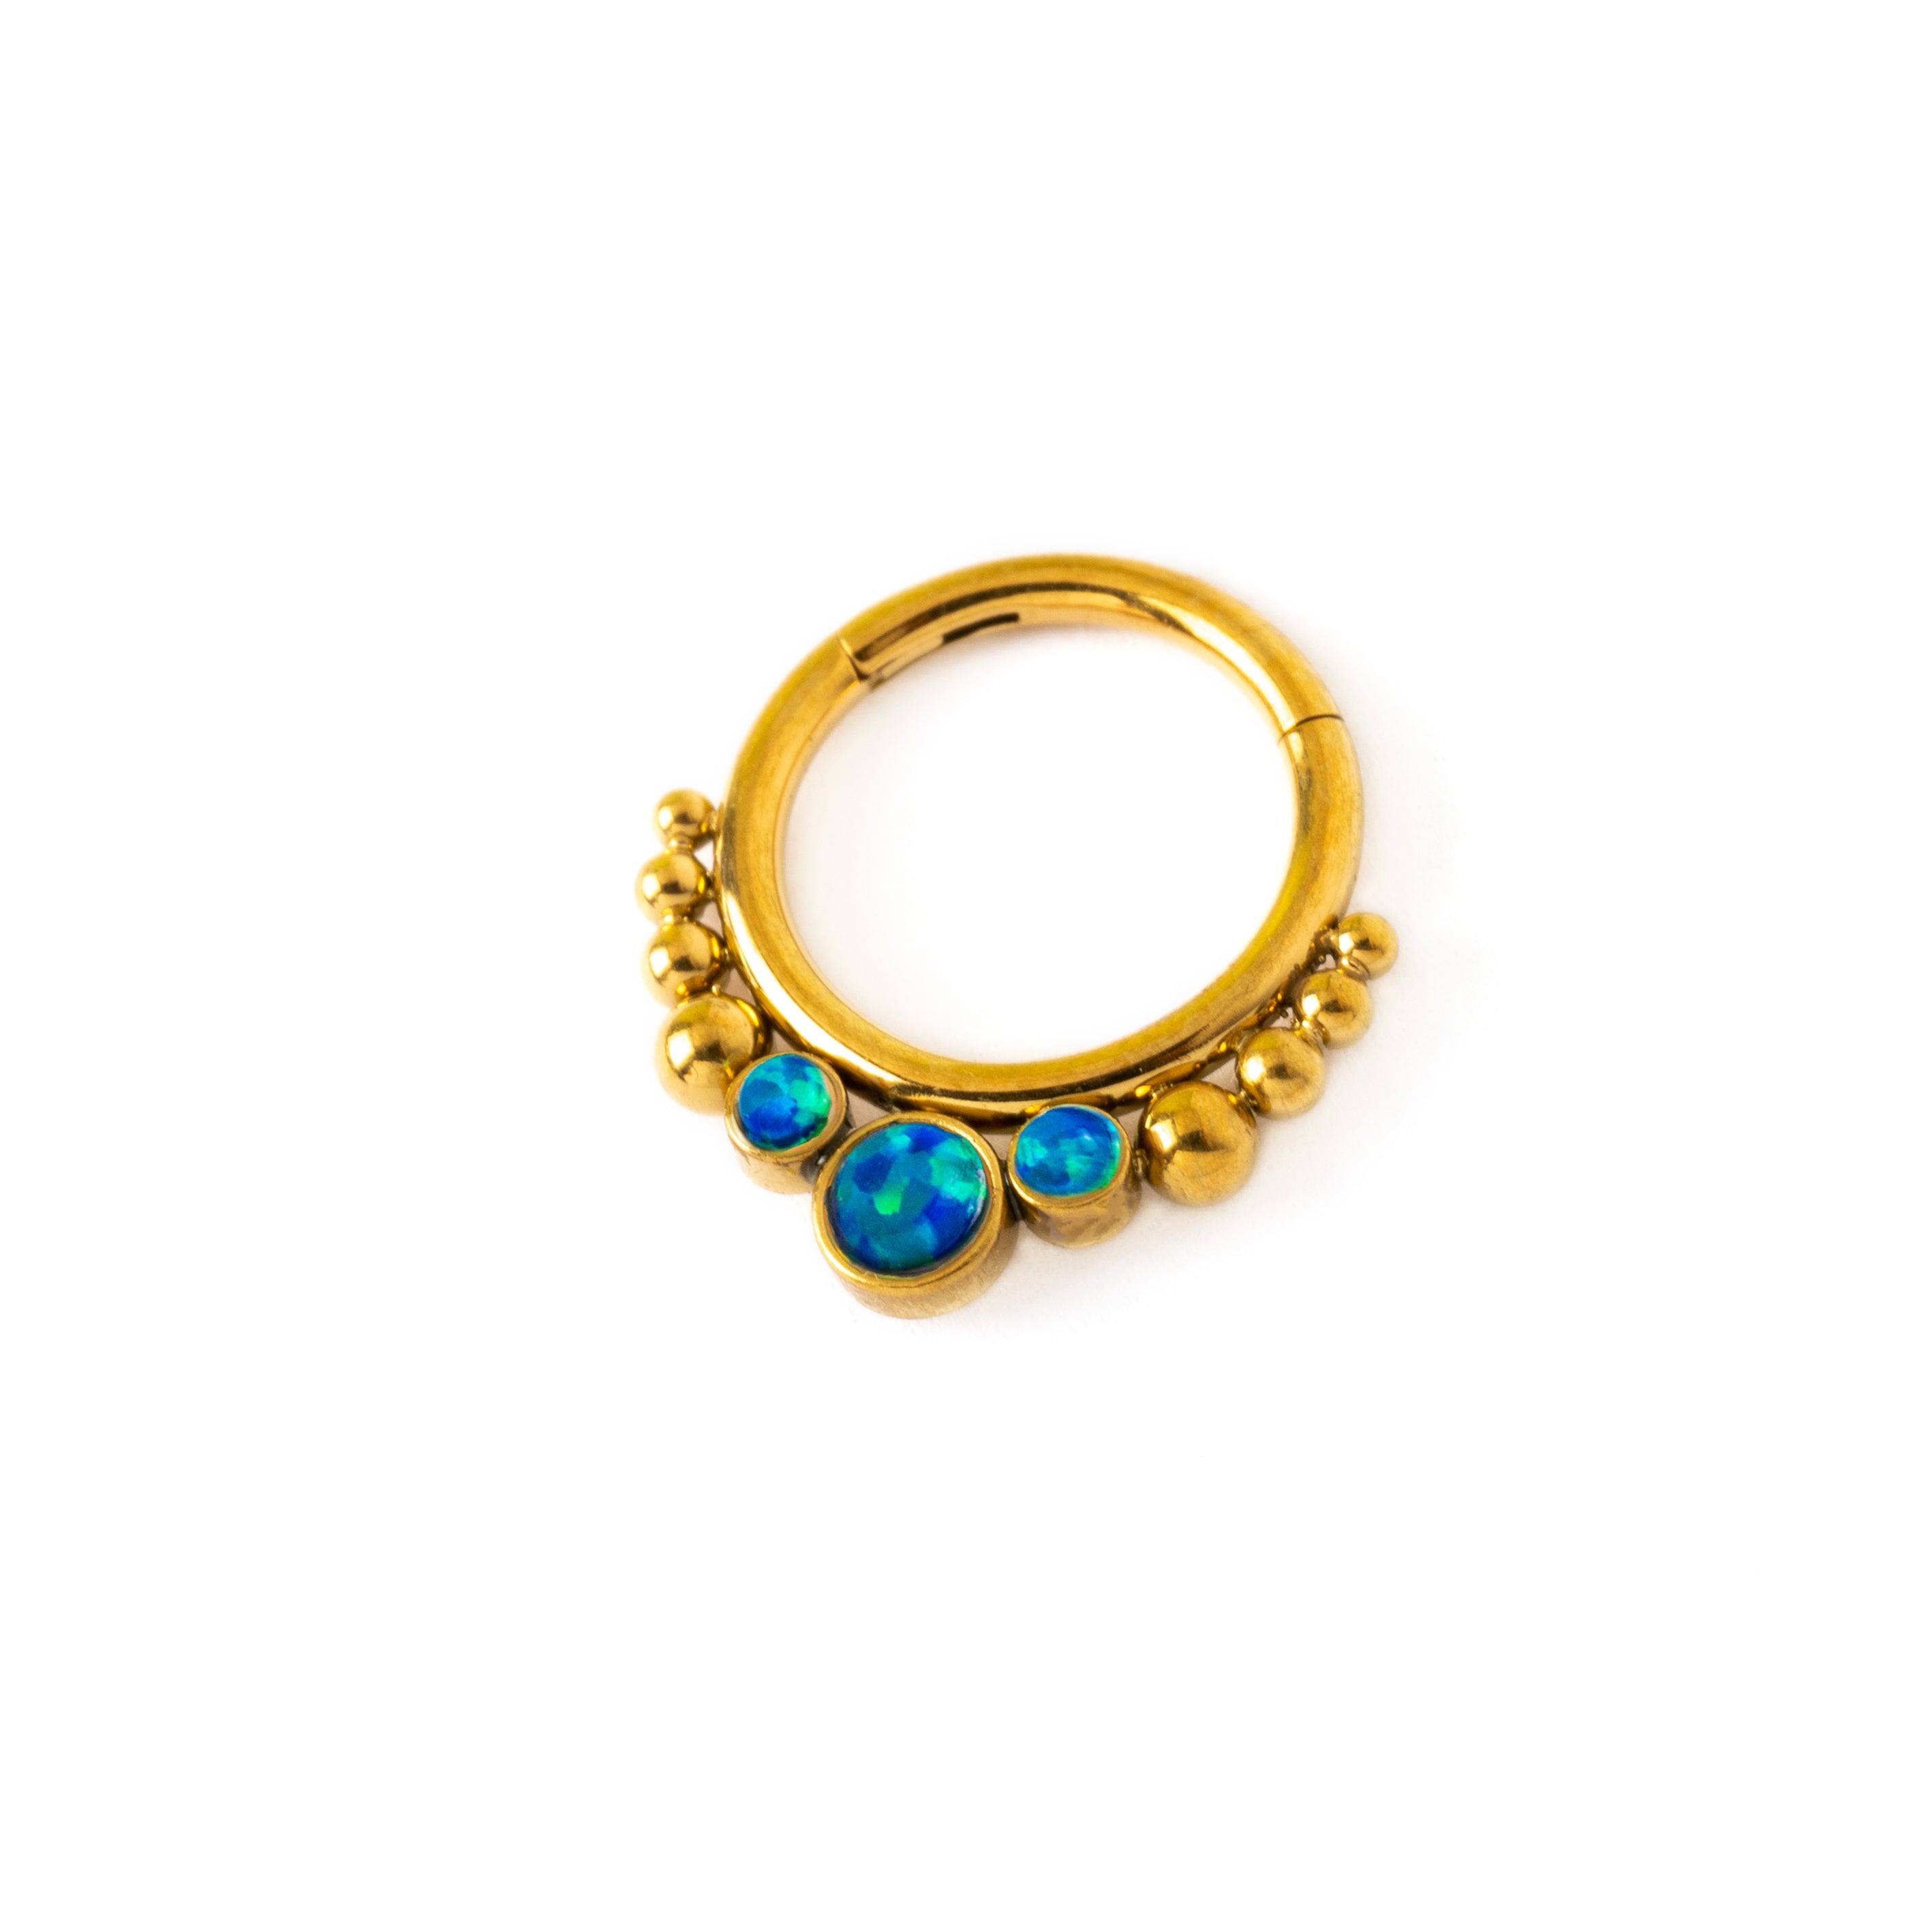 Golden Siti Clicker Ring with Blue Opal right side view